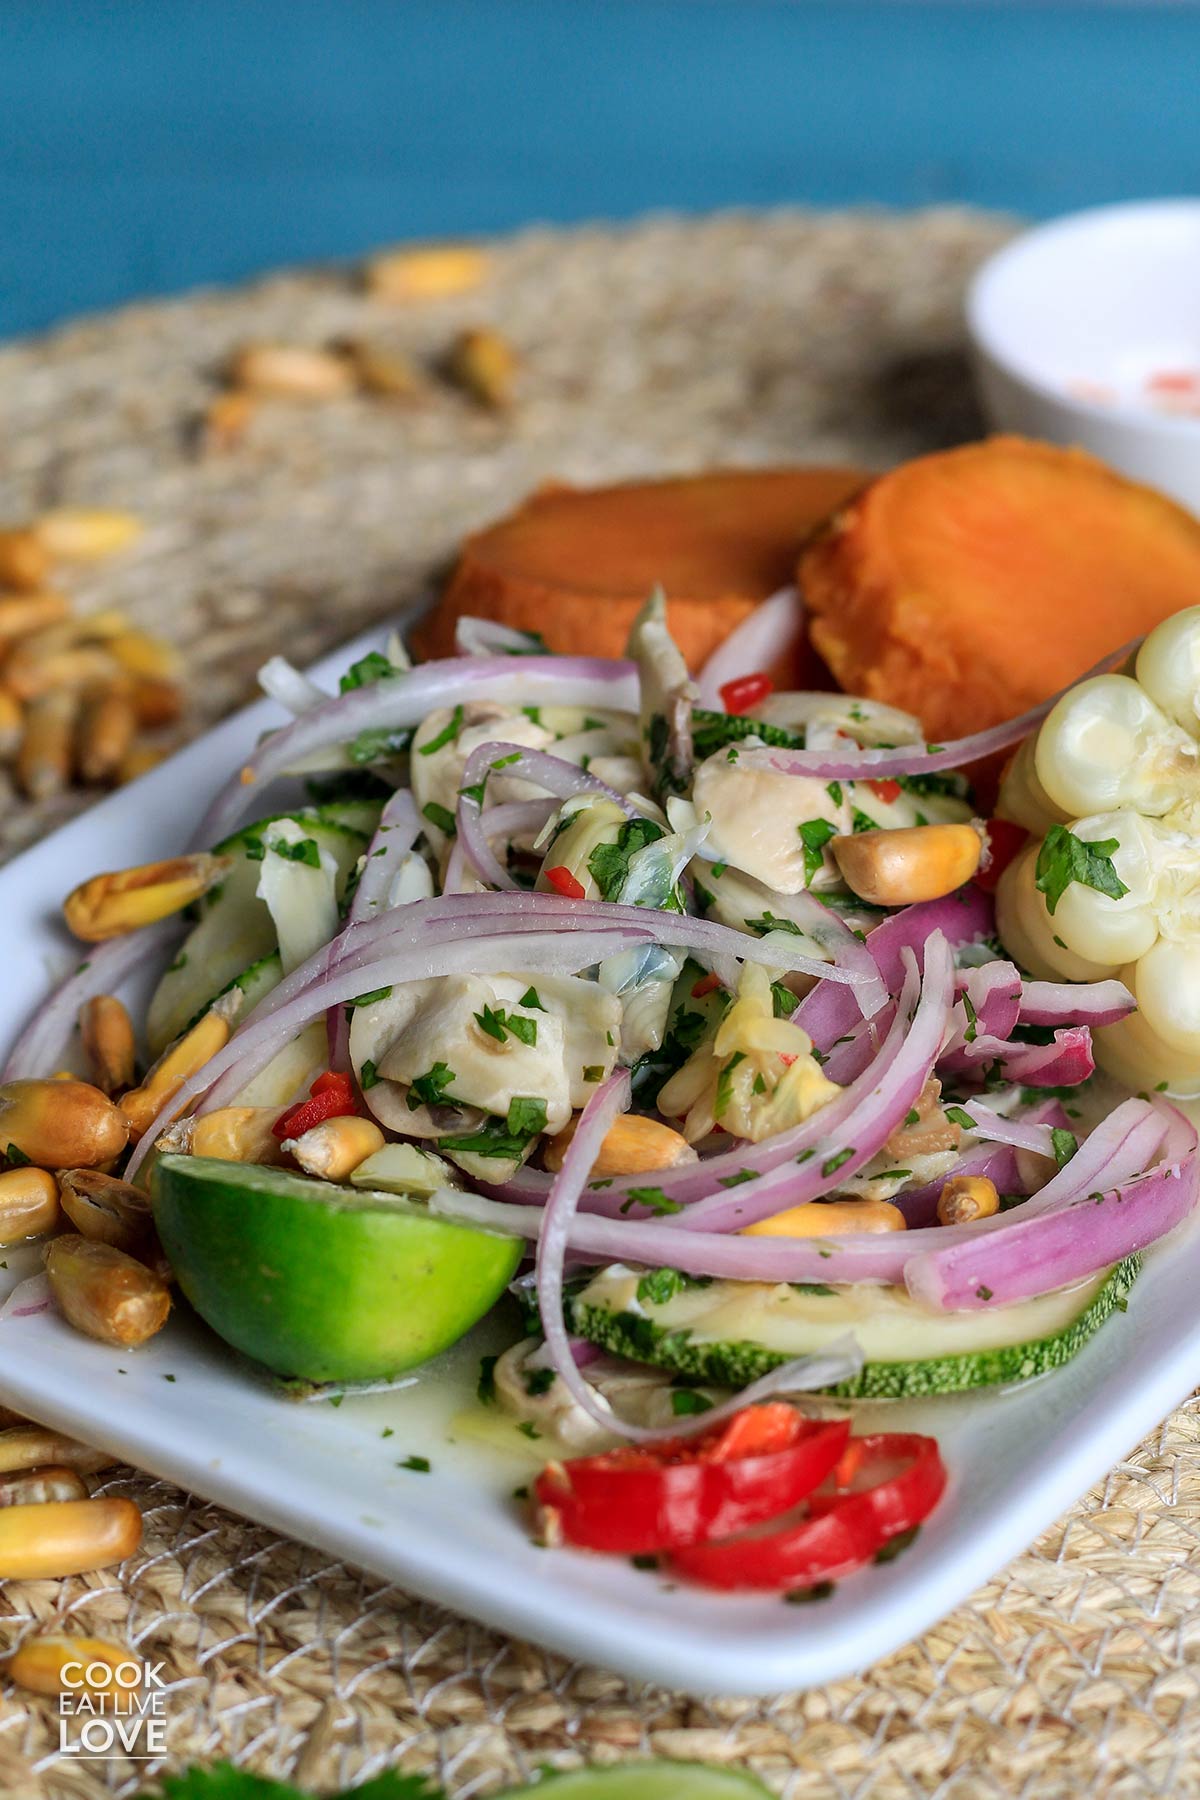 Vegan ceviche on a plate accompanied by sweet potatoes and choclo.